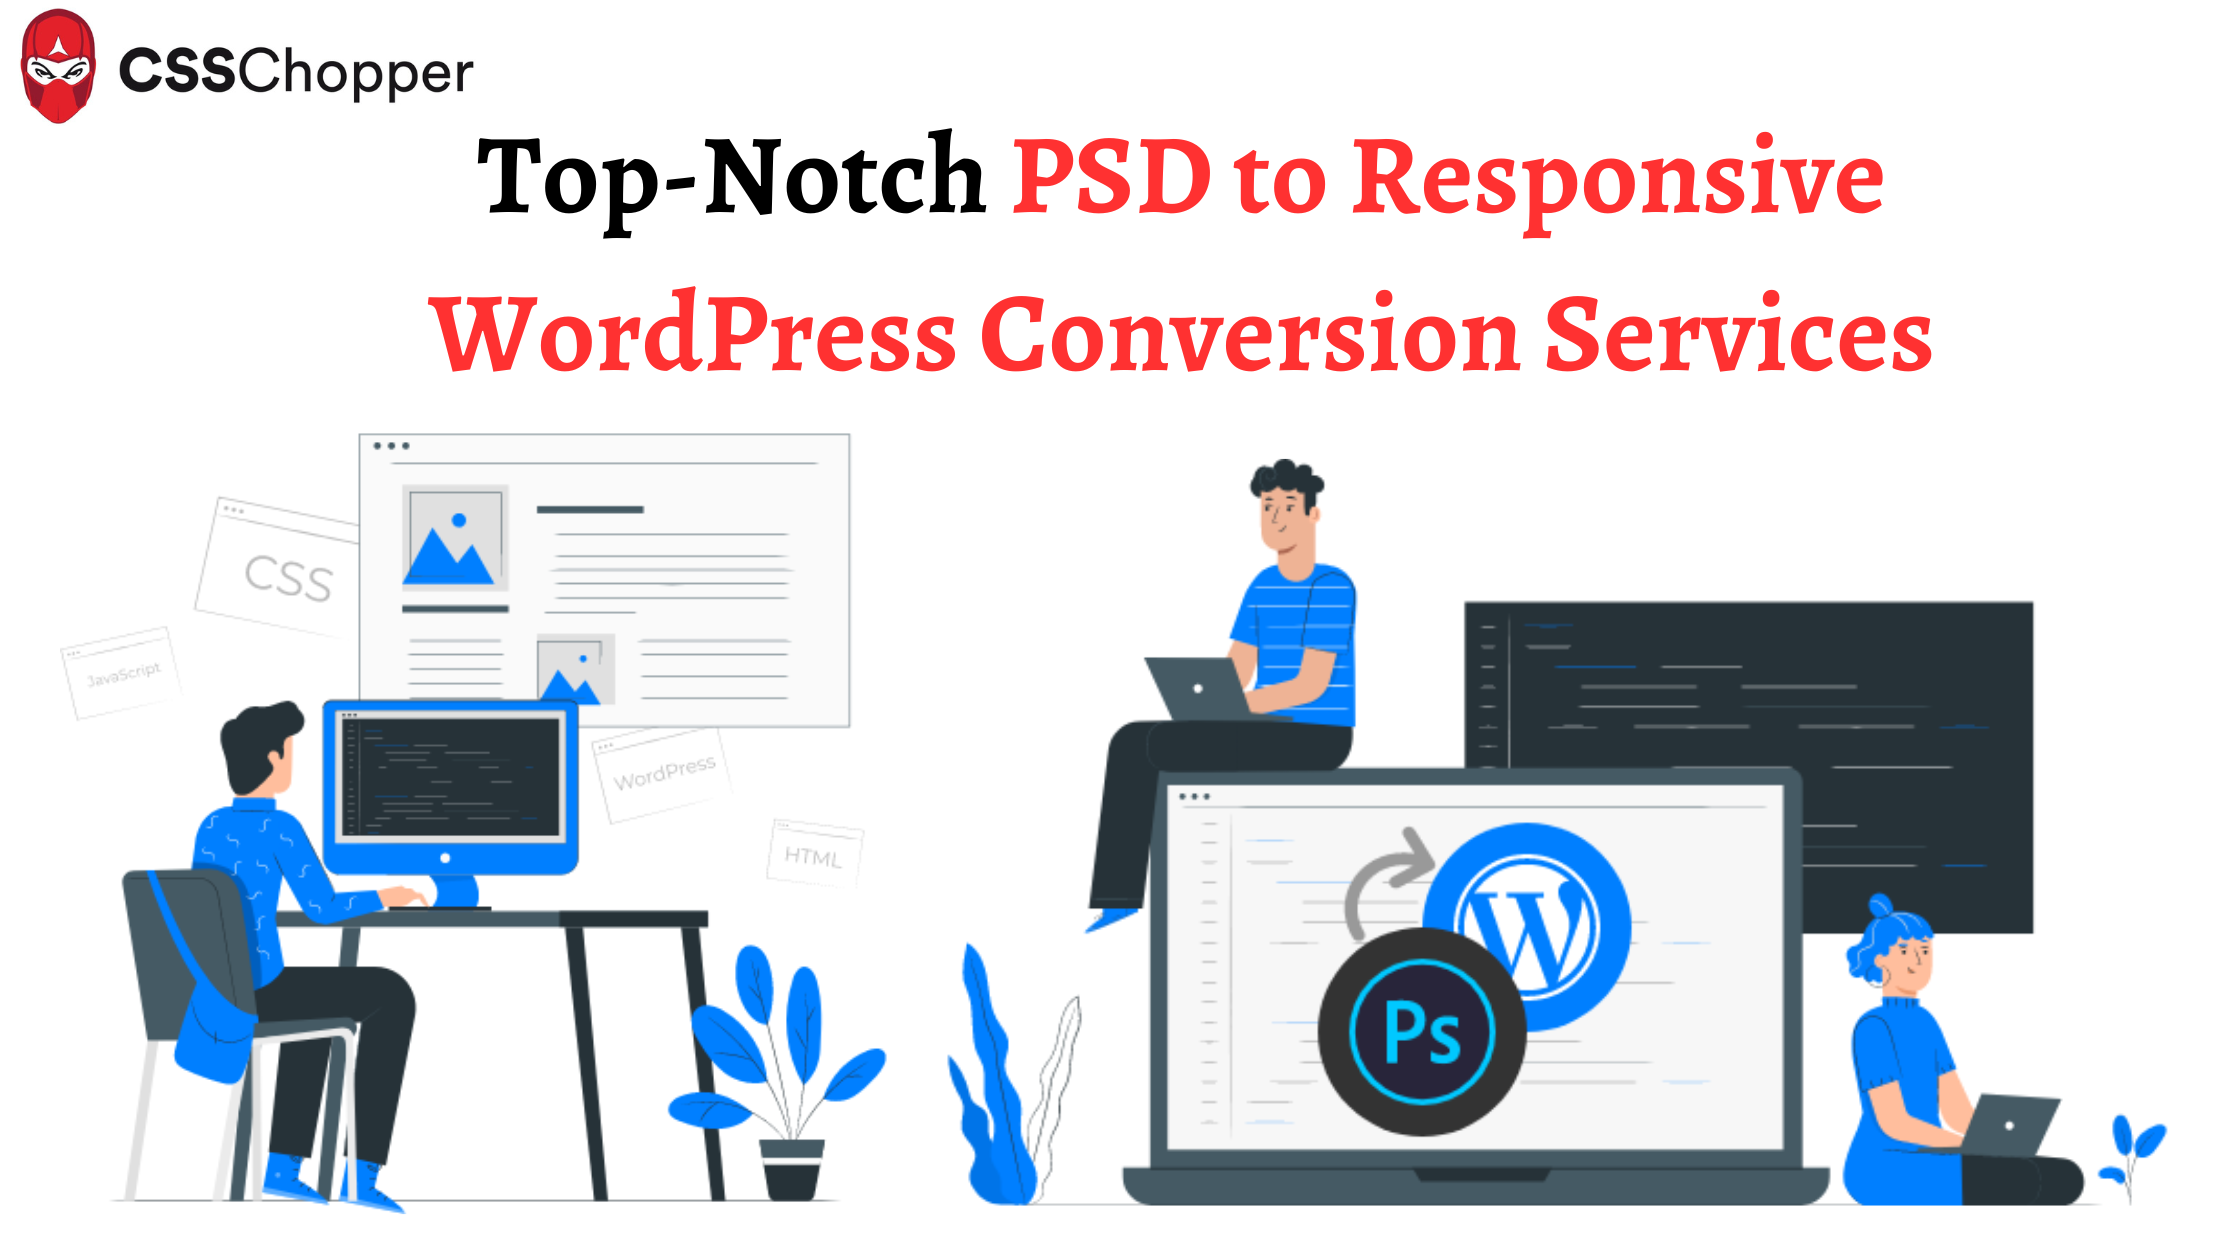 Top-Notch PSD to Responsive WordPress Conversion Services